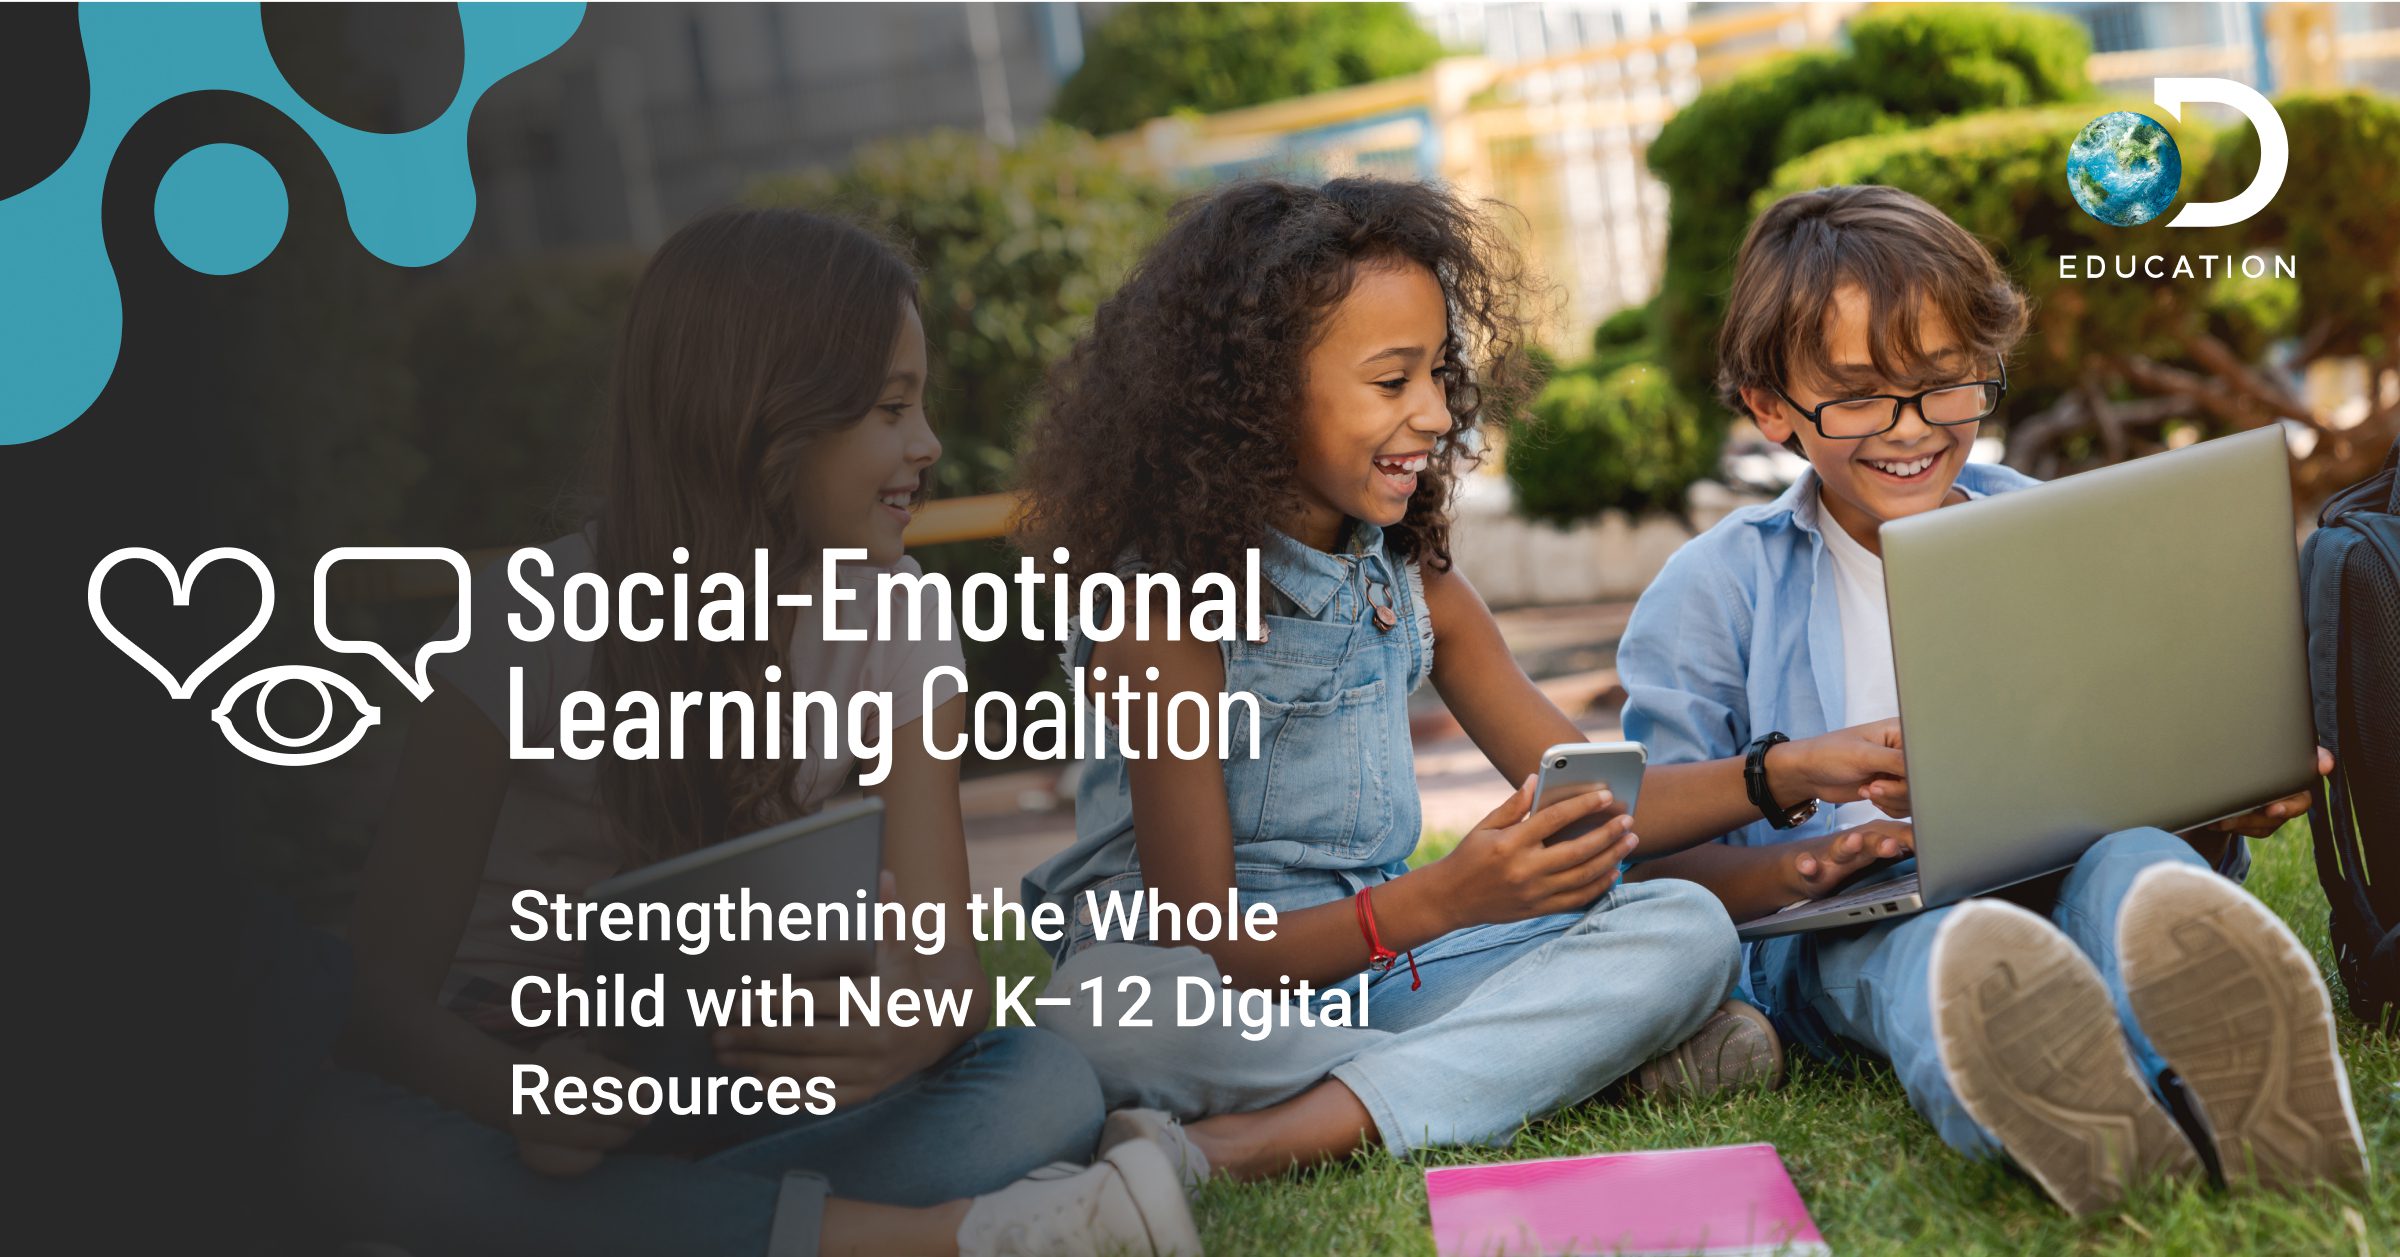 Discovery Education and Industry Leaders Launch Social-Emotional Learning Coalition to Address Critical Educator and Student Needs with No-Cost Resources